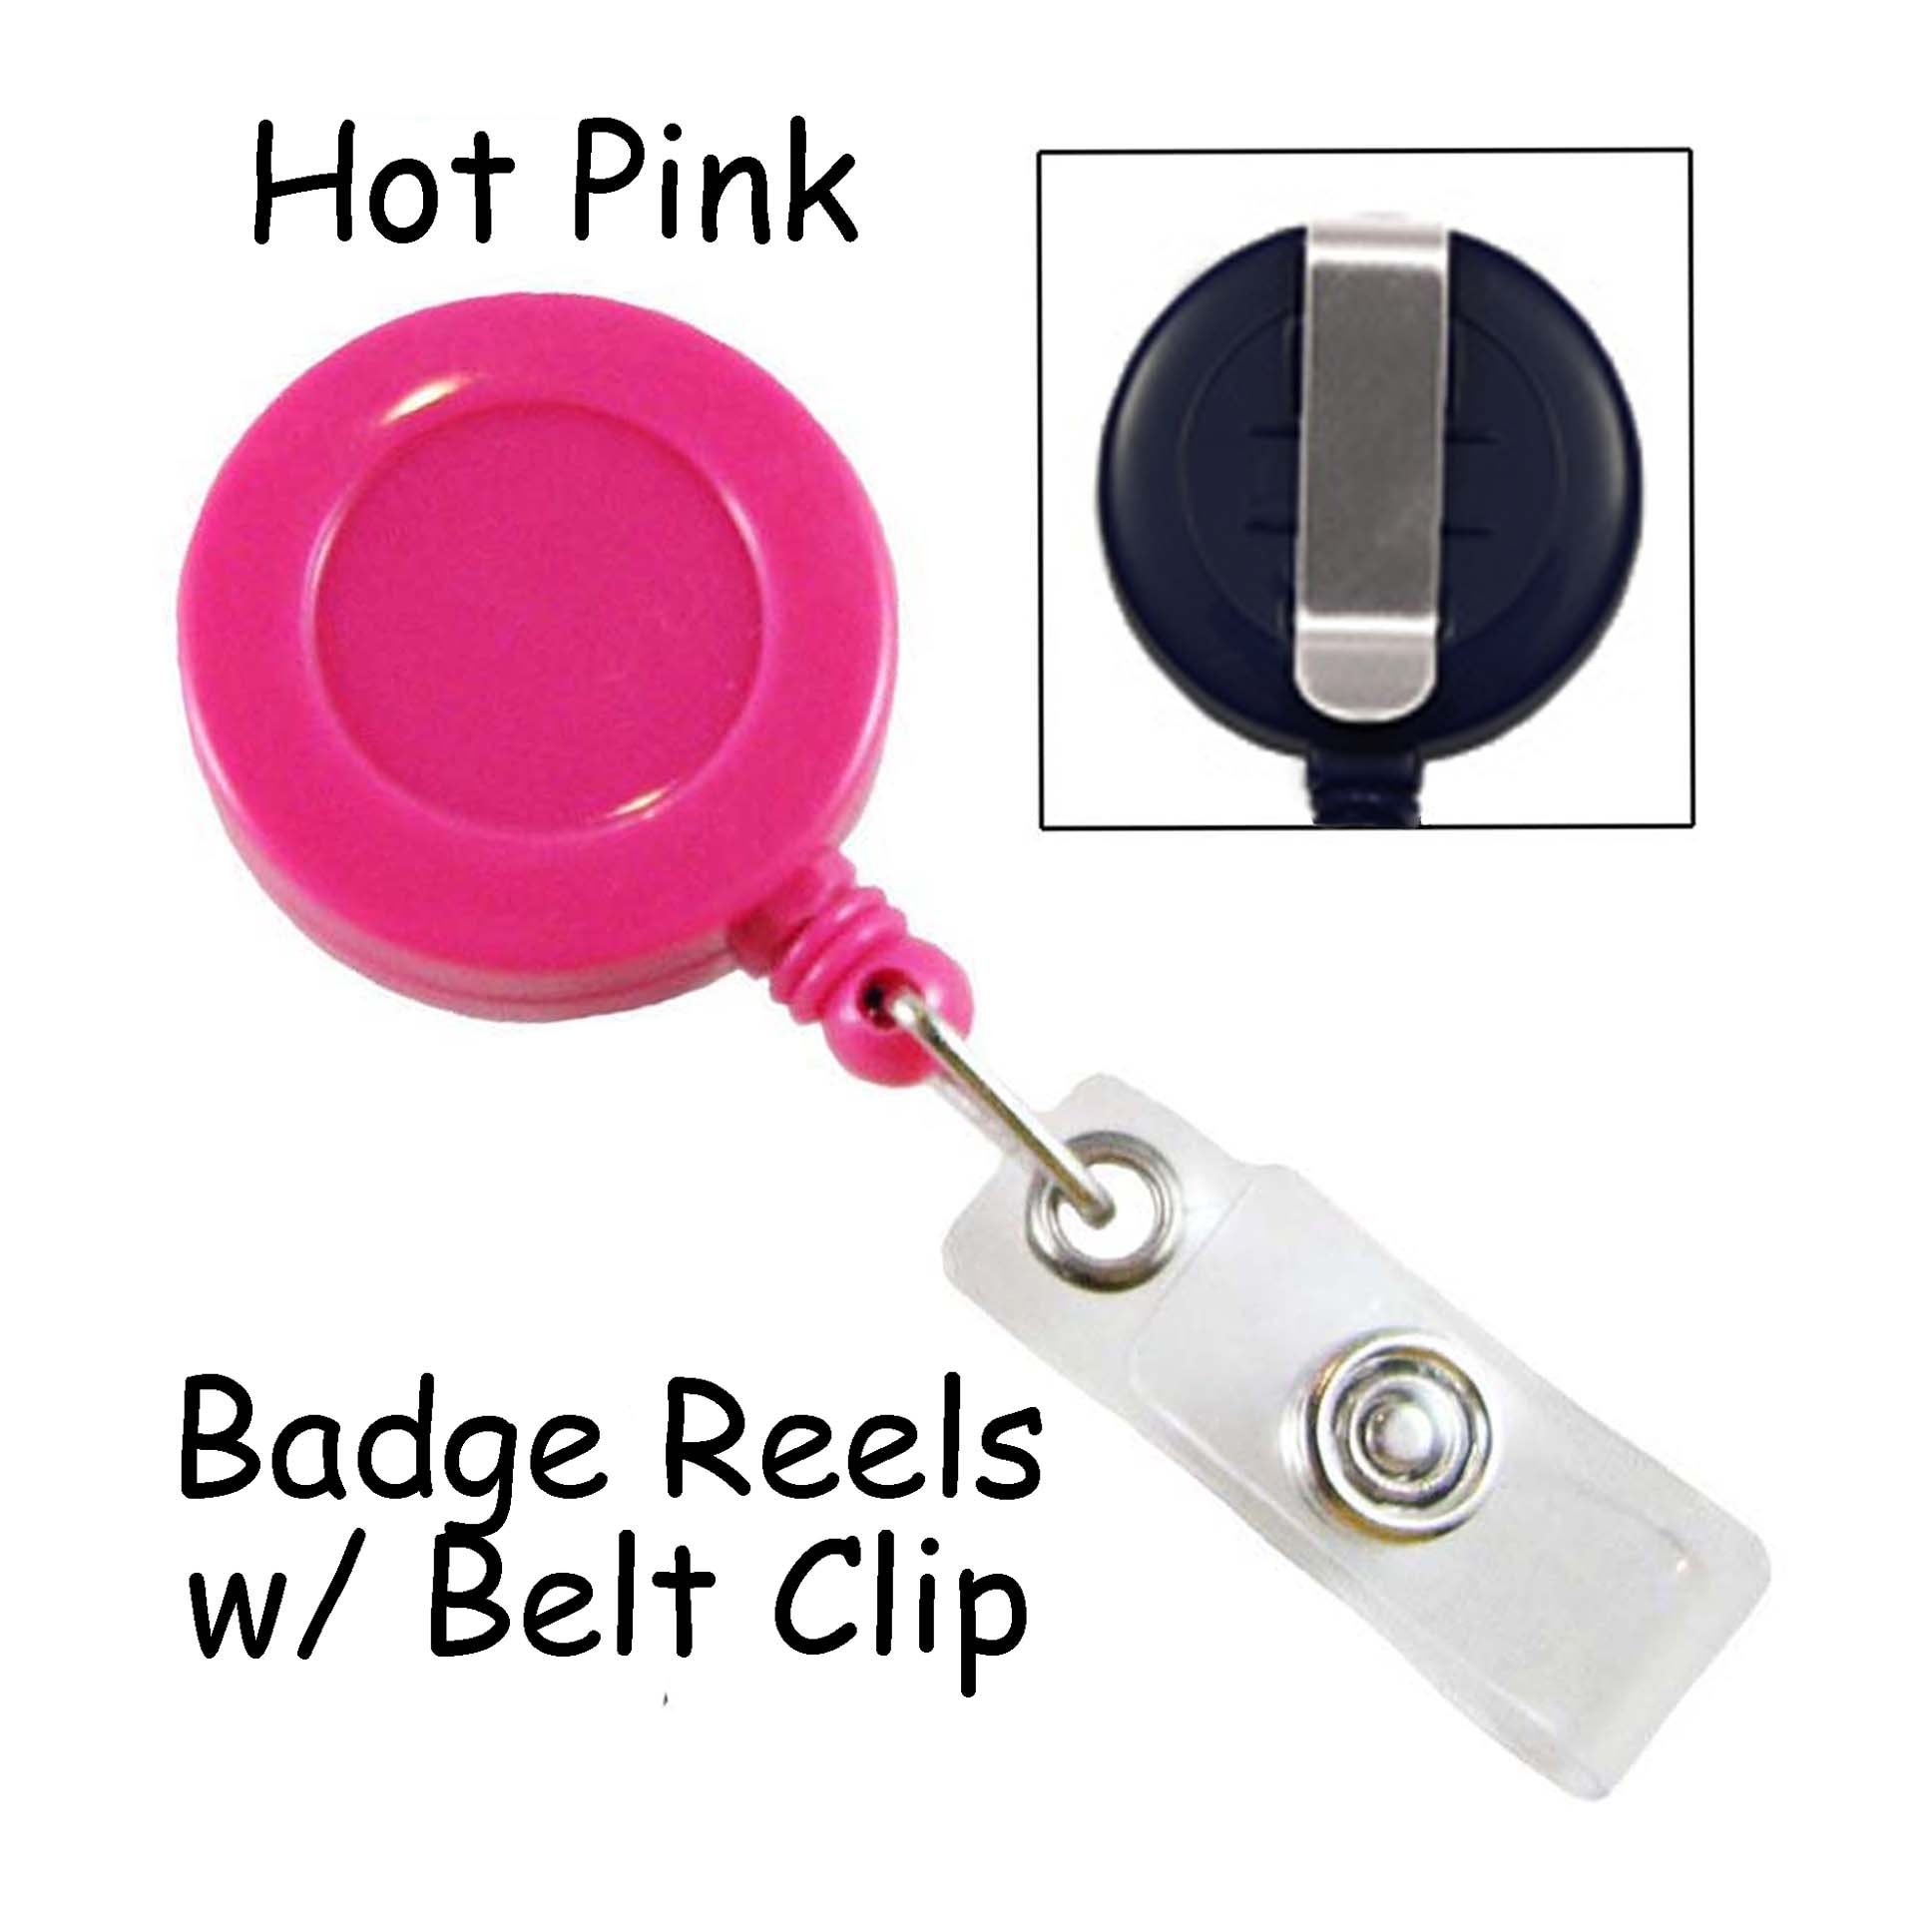 5 Retractable Badge Reels With Belt Clip and Plastic Strap Hot